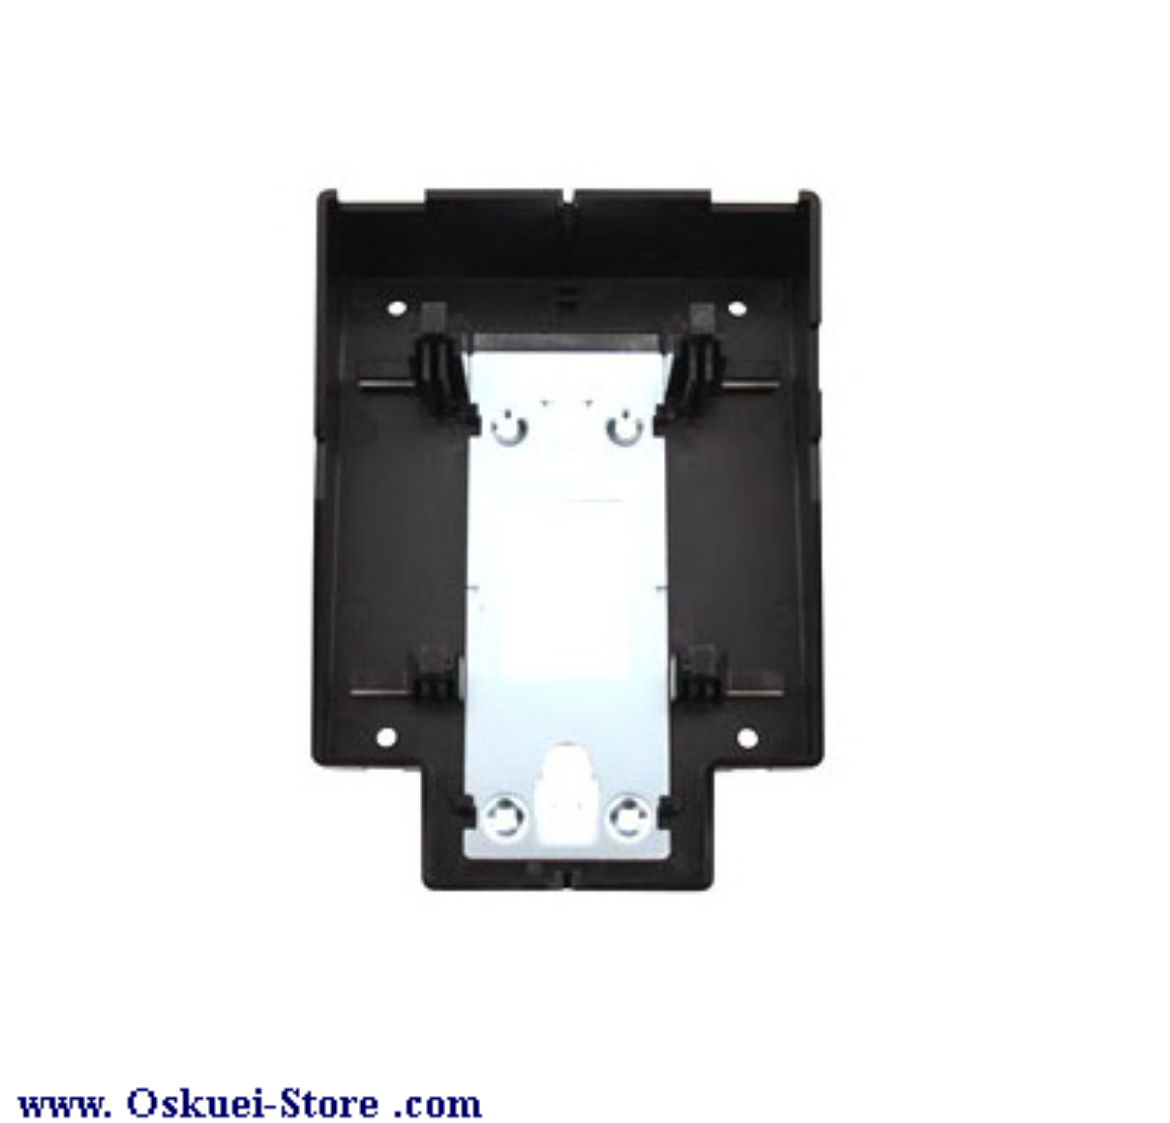 Wall Mount Kit for IP-MLT